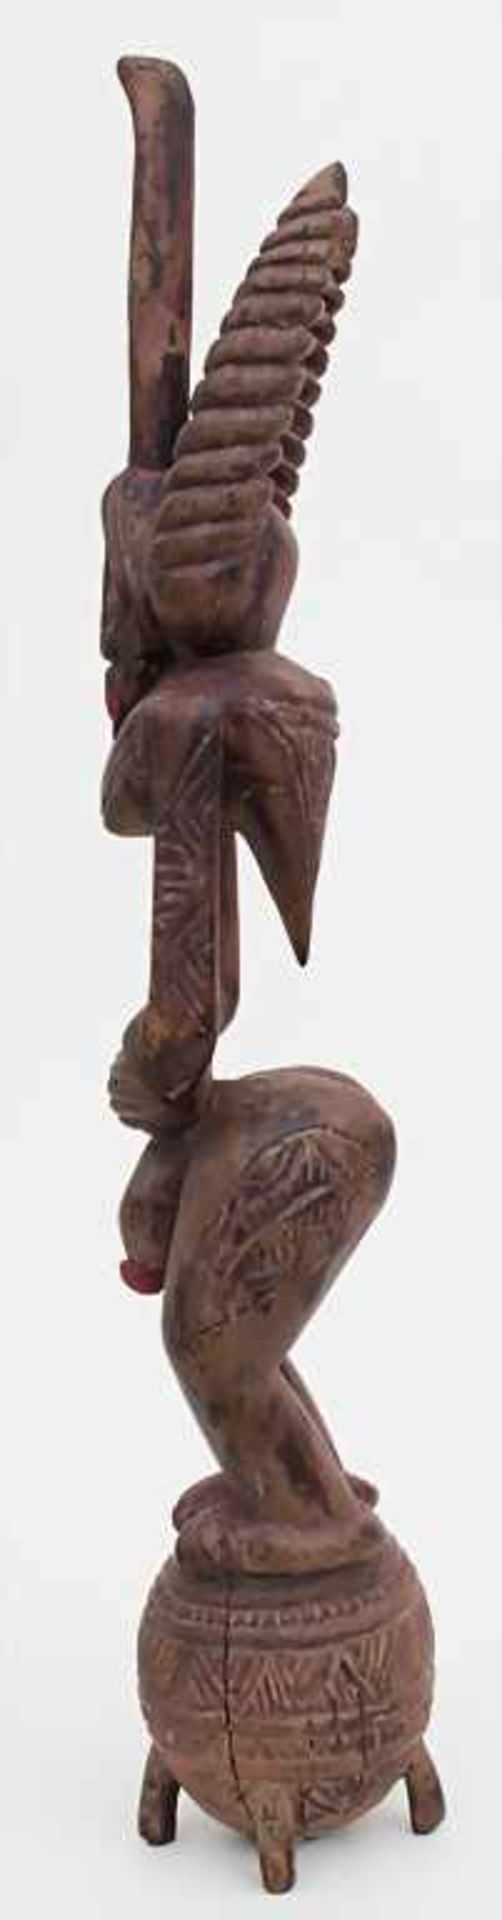 Männliche Figur / A male figure, Igala, NigeriaMaterial: Holz, rotbraune Patina,Höhe: 57 cm, - Image 3 of 4